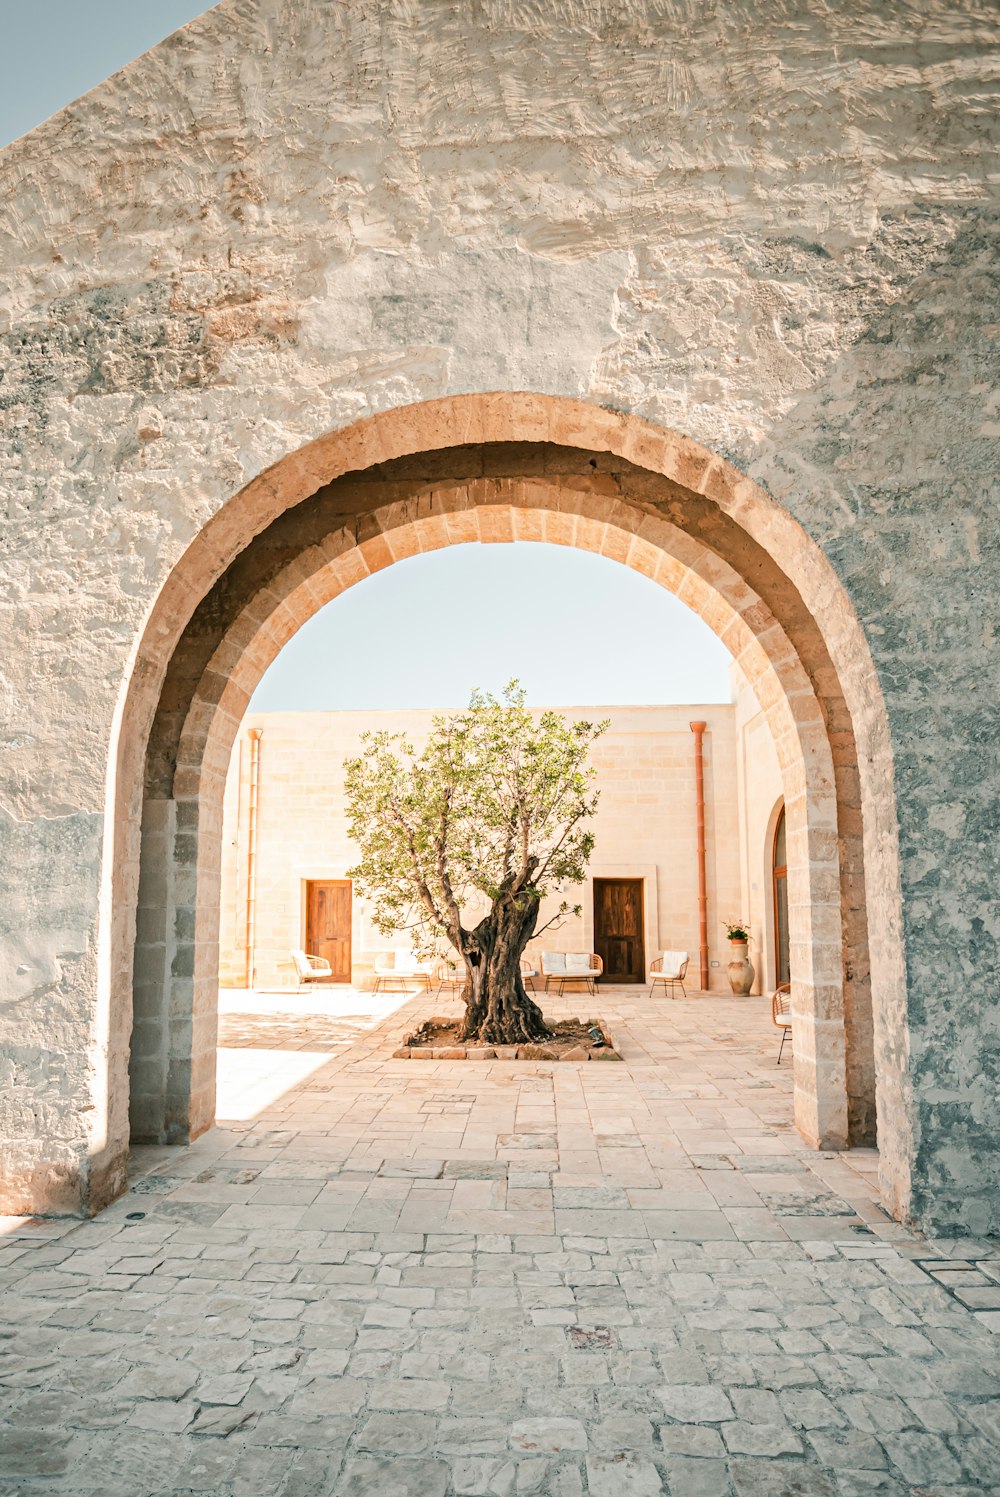 a tree in a stone archway